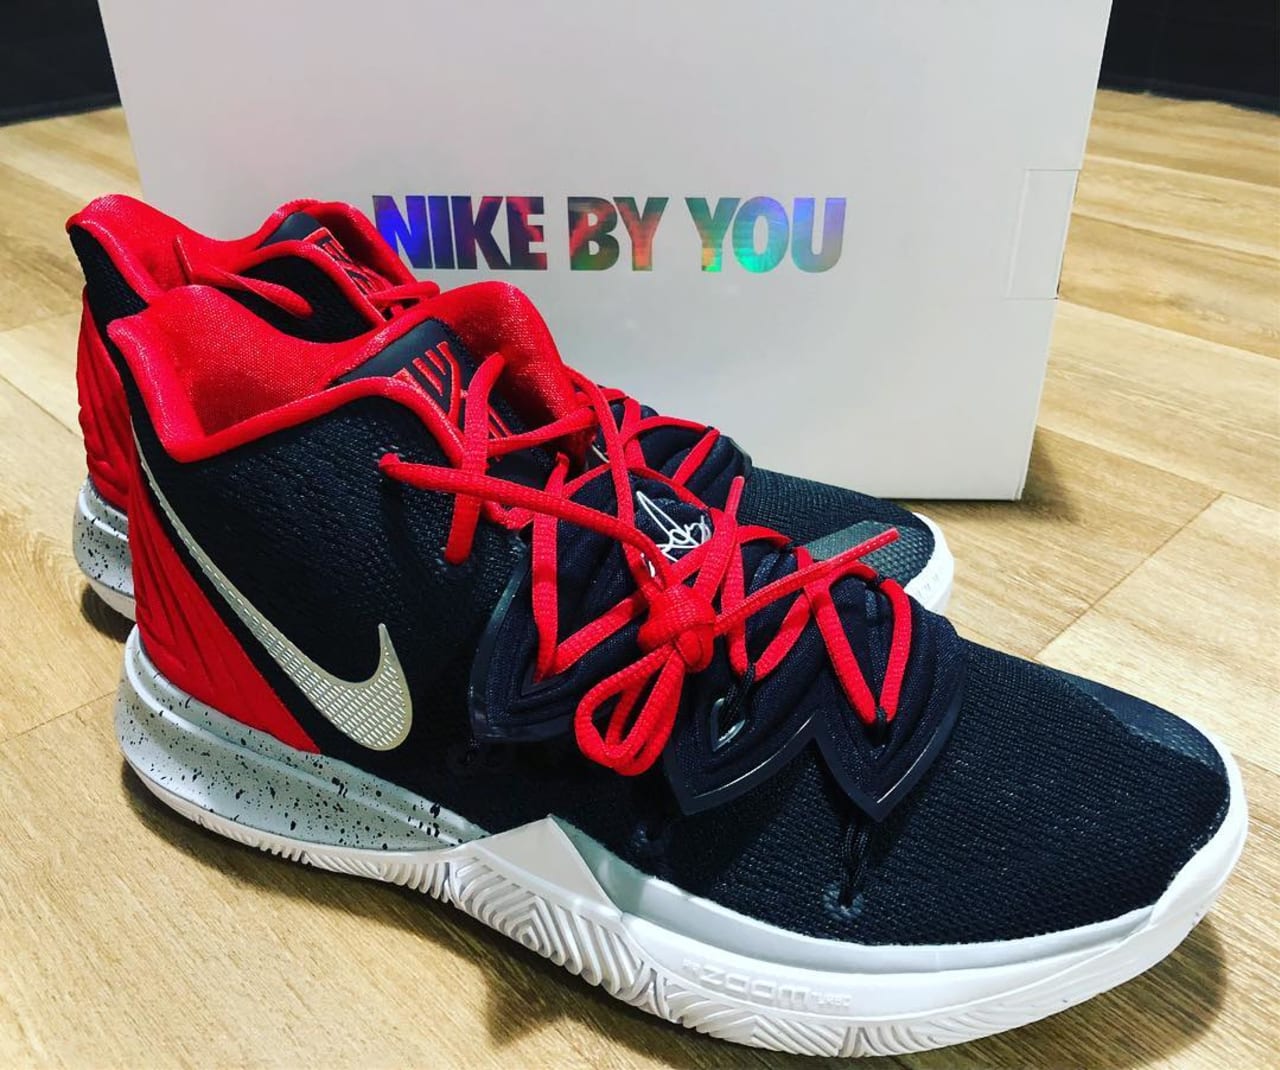 kyrie 6 by you designs